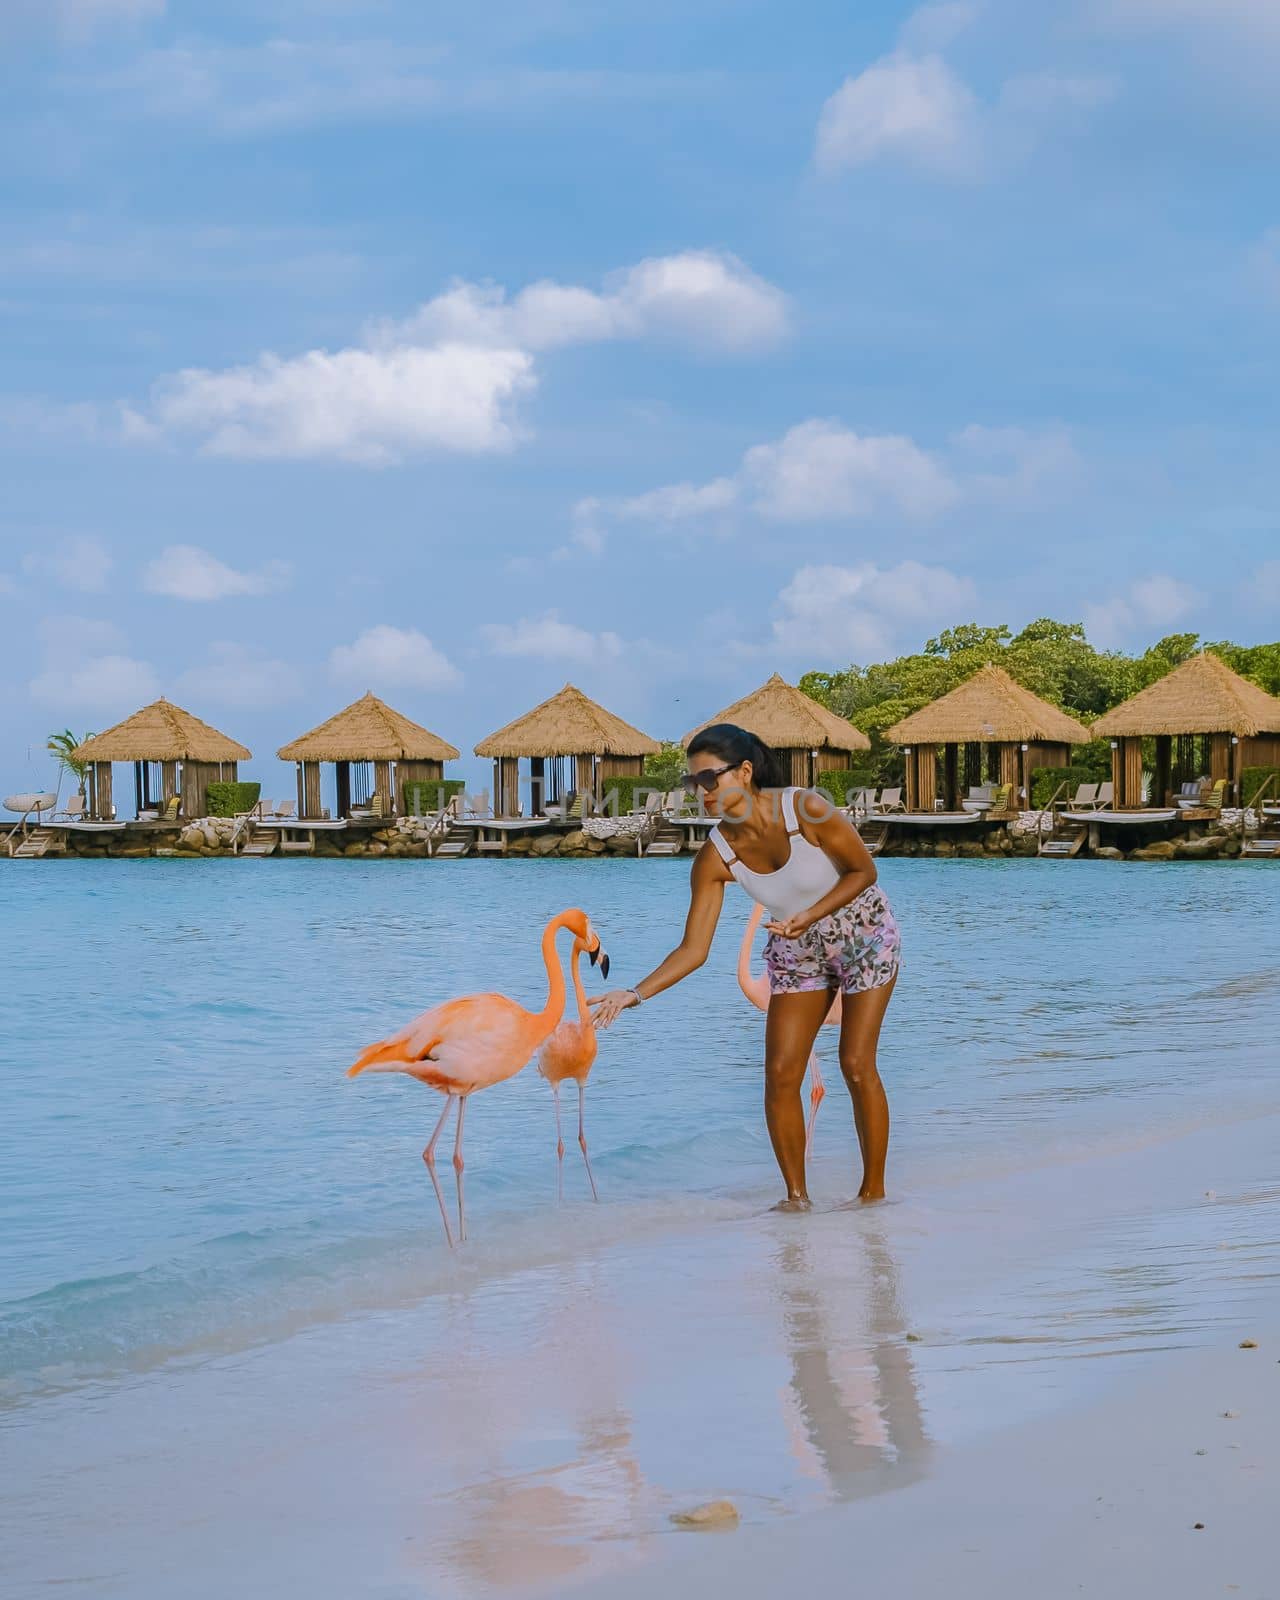 Aruba beach with pink flamingos at the beach, flamingo at the beach in Aruba Island Caribbean. A colorful flamingo at the beachfront, a couple of men and woman on the beach mid age man and woman